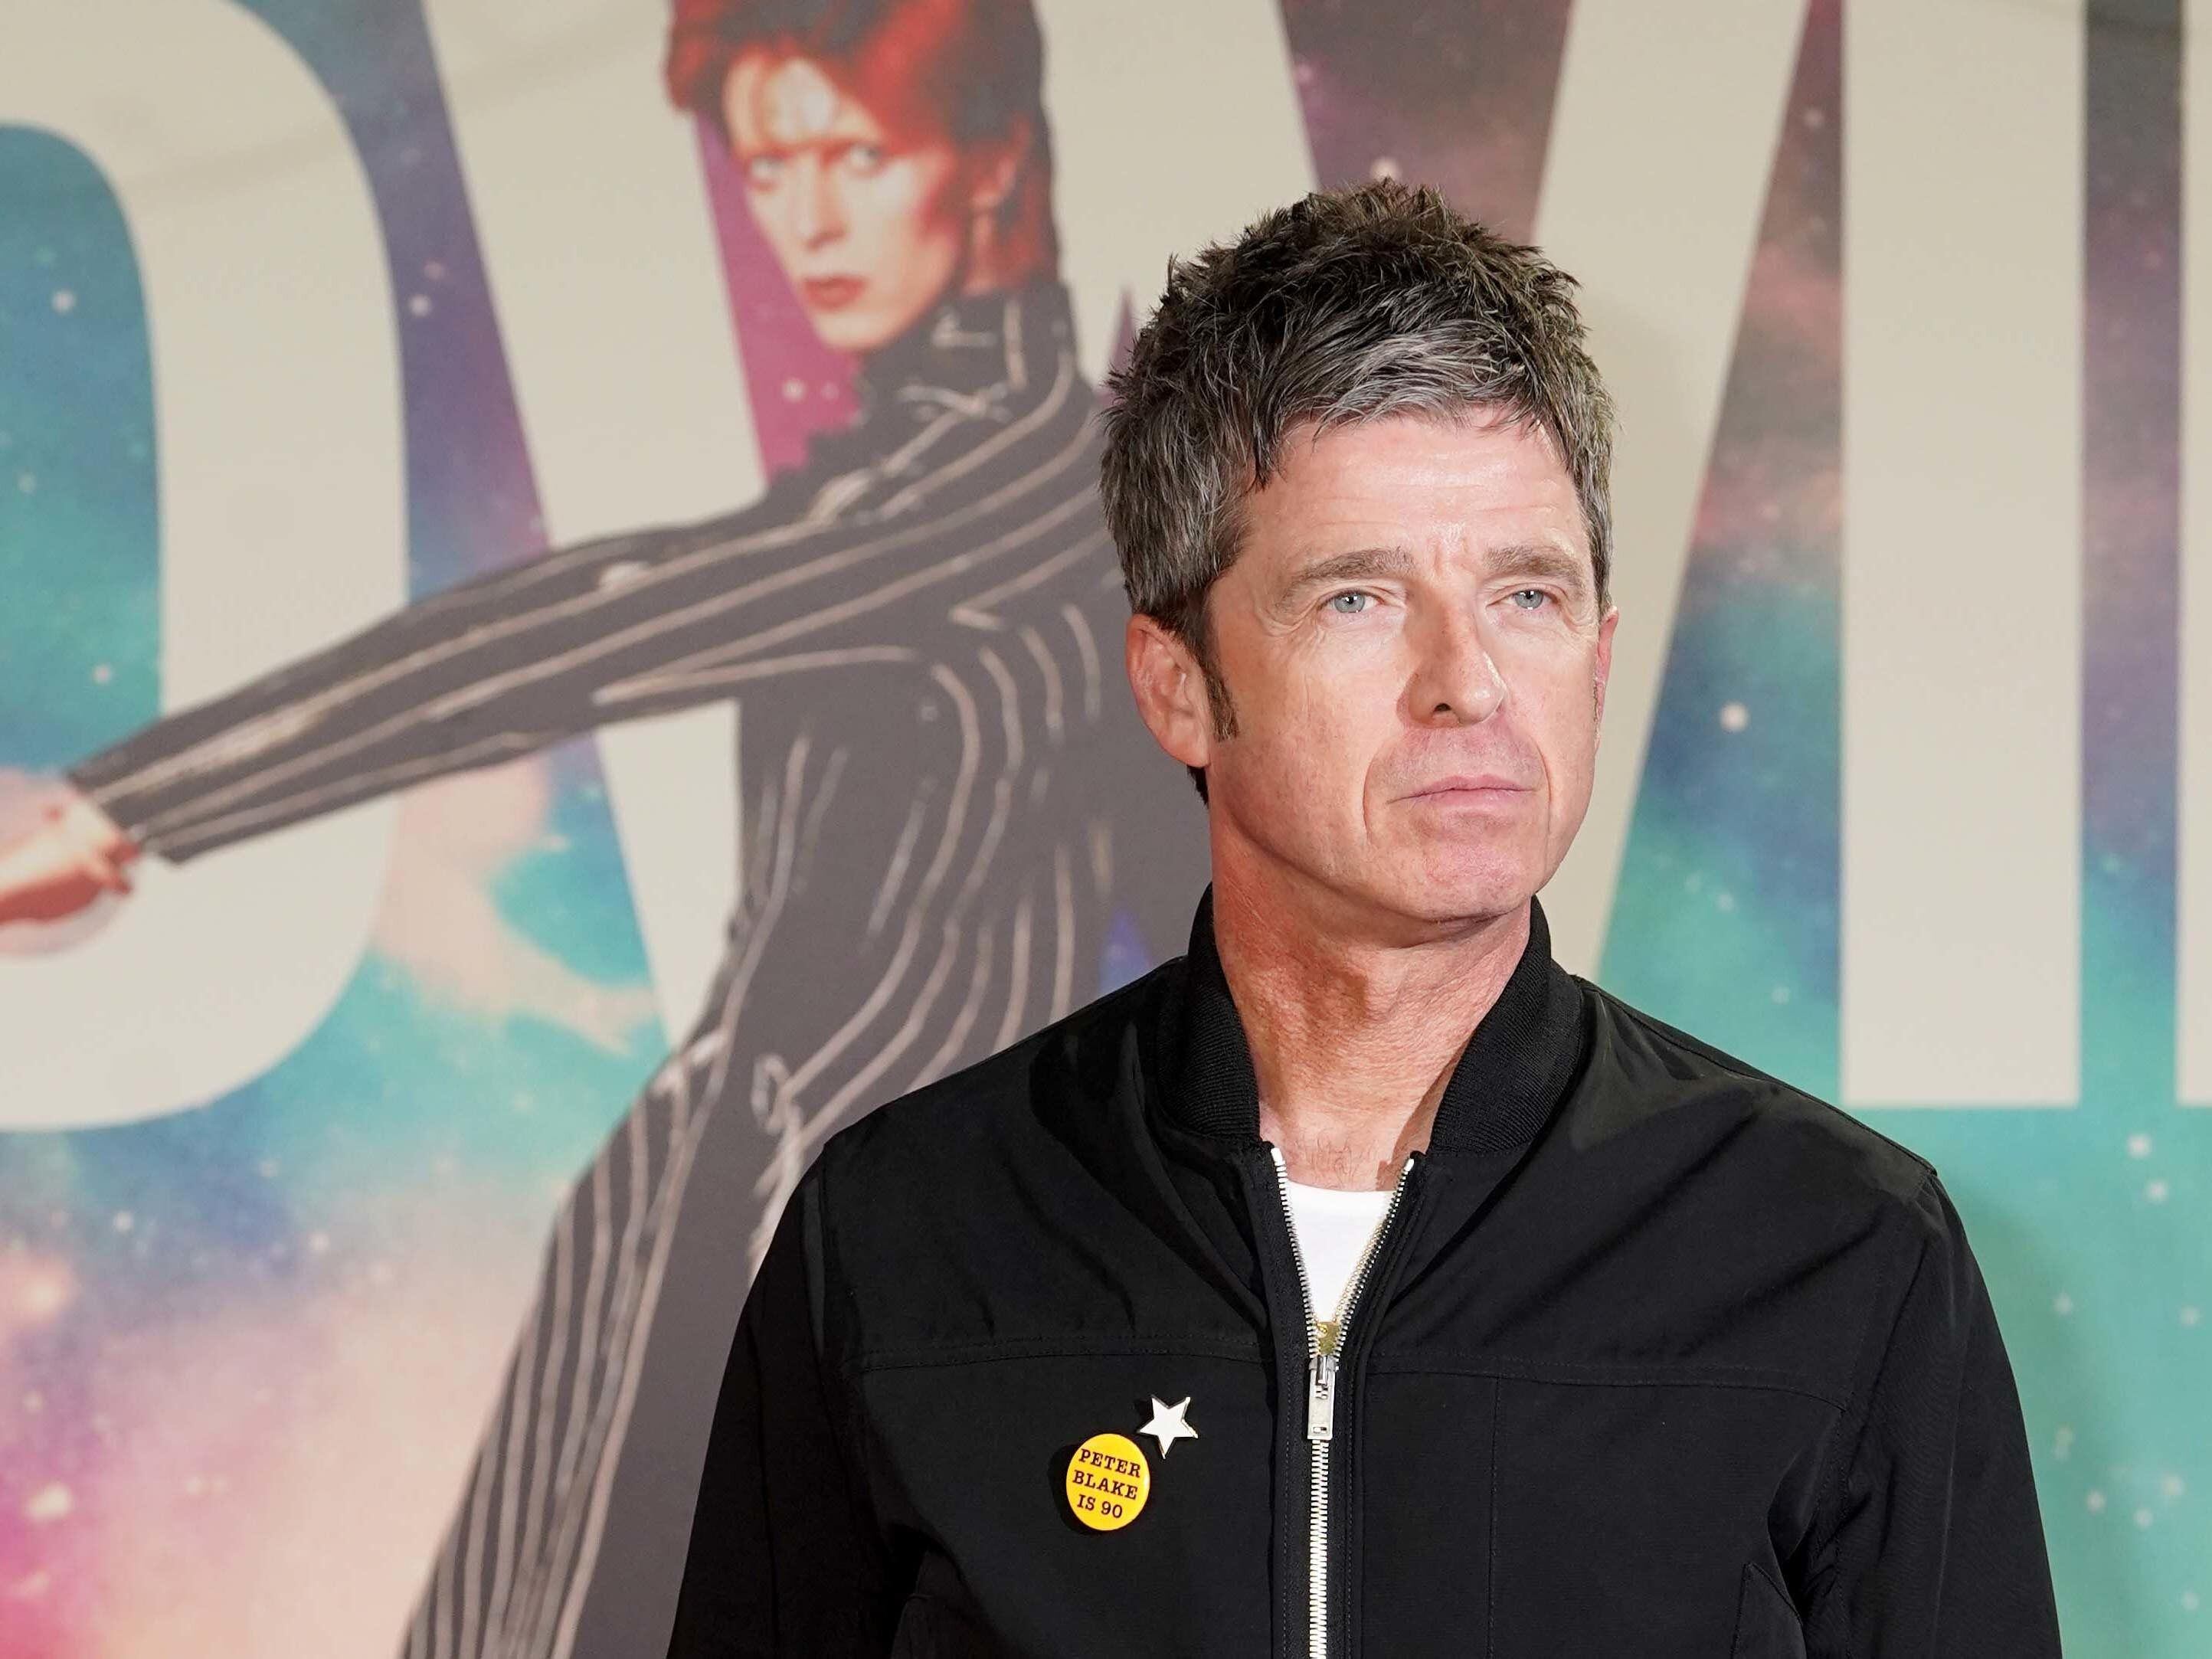 Noel Gallagher imagines how Oasis reunion would look now he is ‘a certain age’